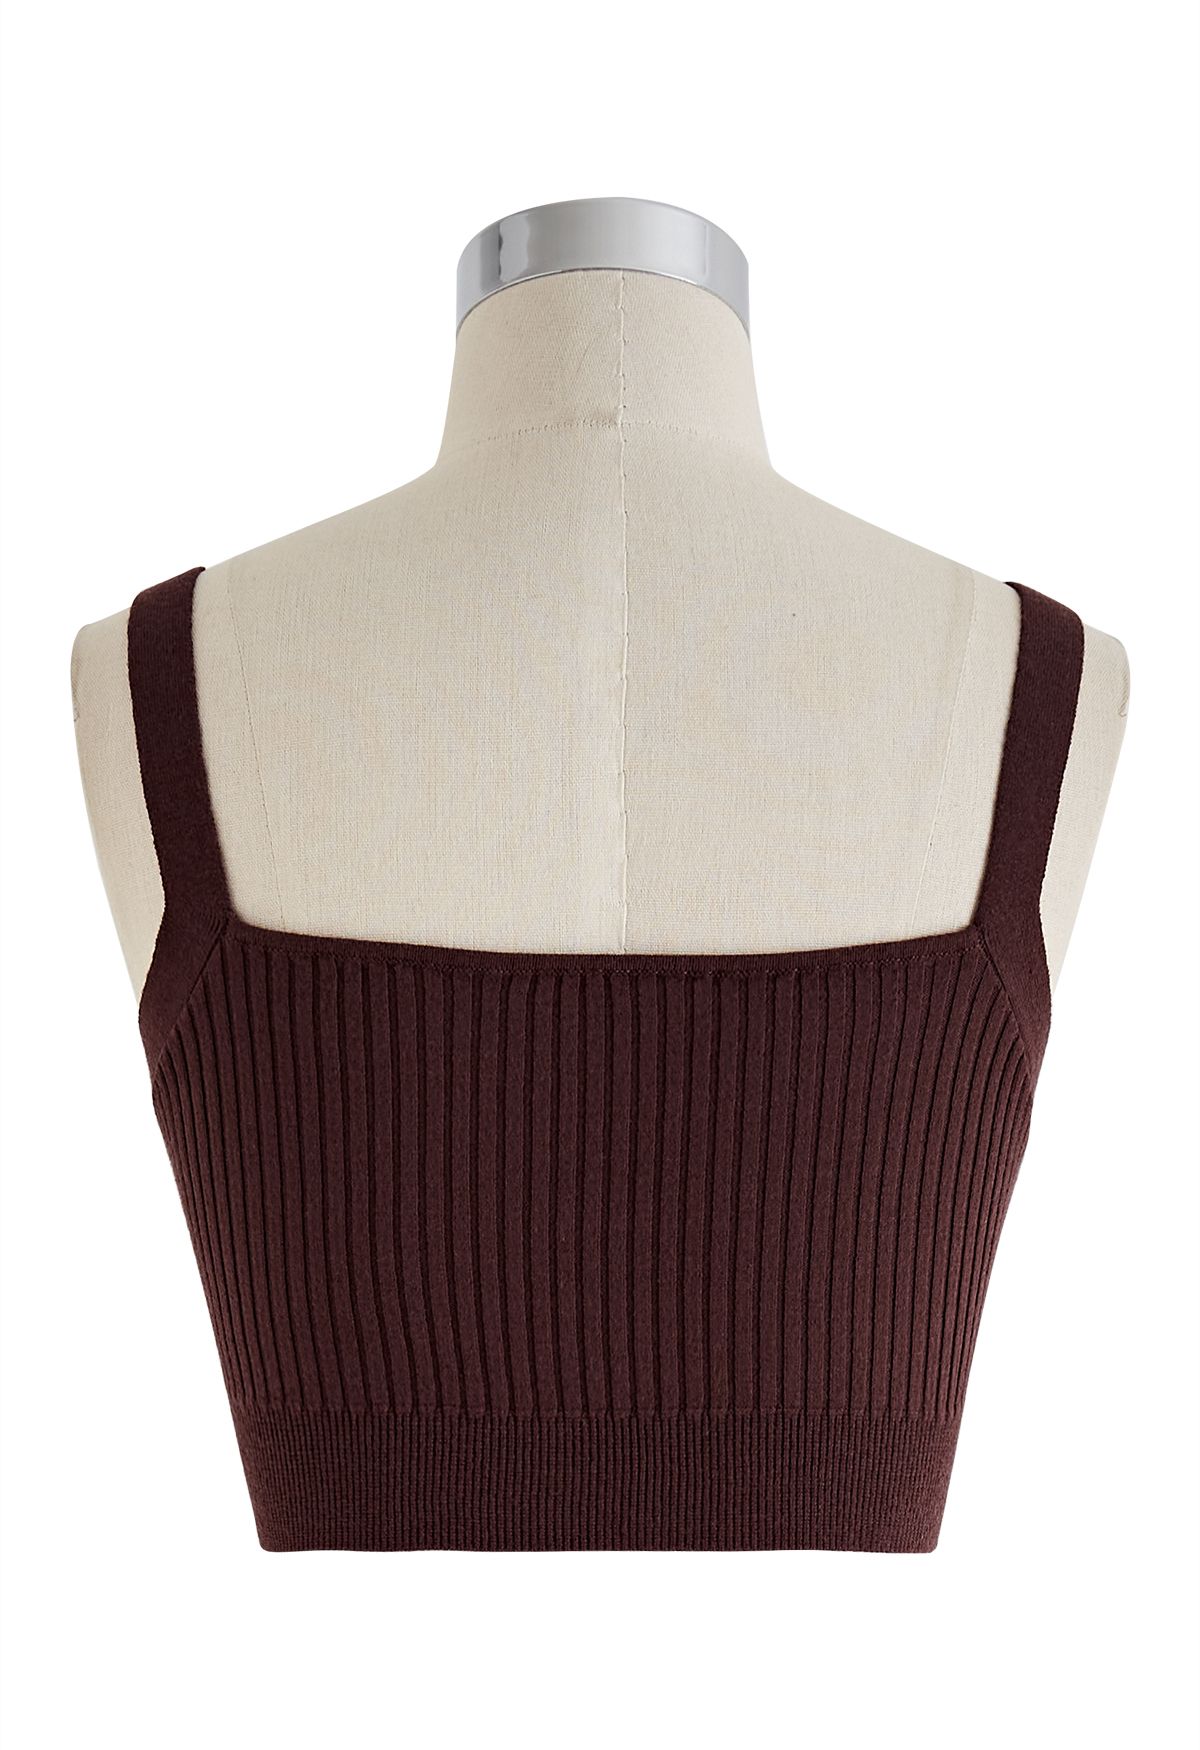 Ultra-Soft Ribbed Cami Knit Cropped Top in Brown